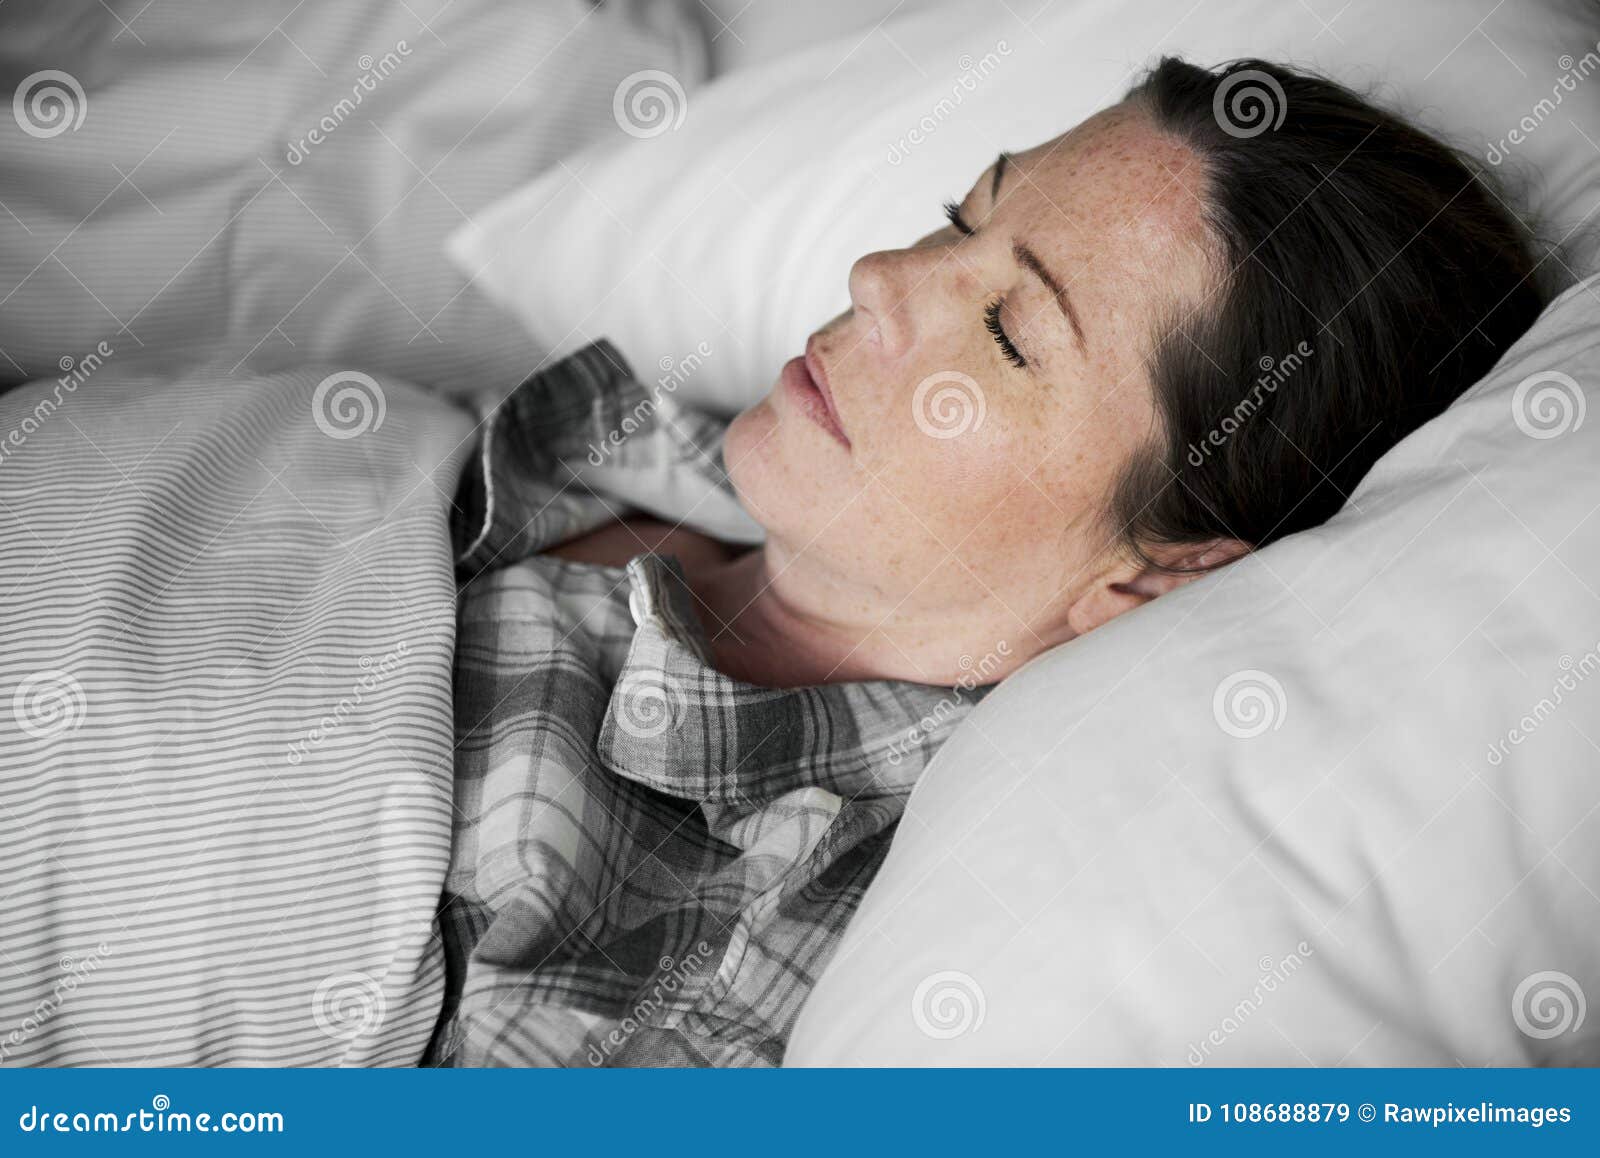 a woman sleeping soundly on bed